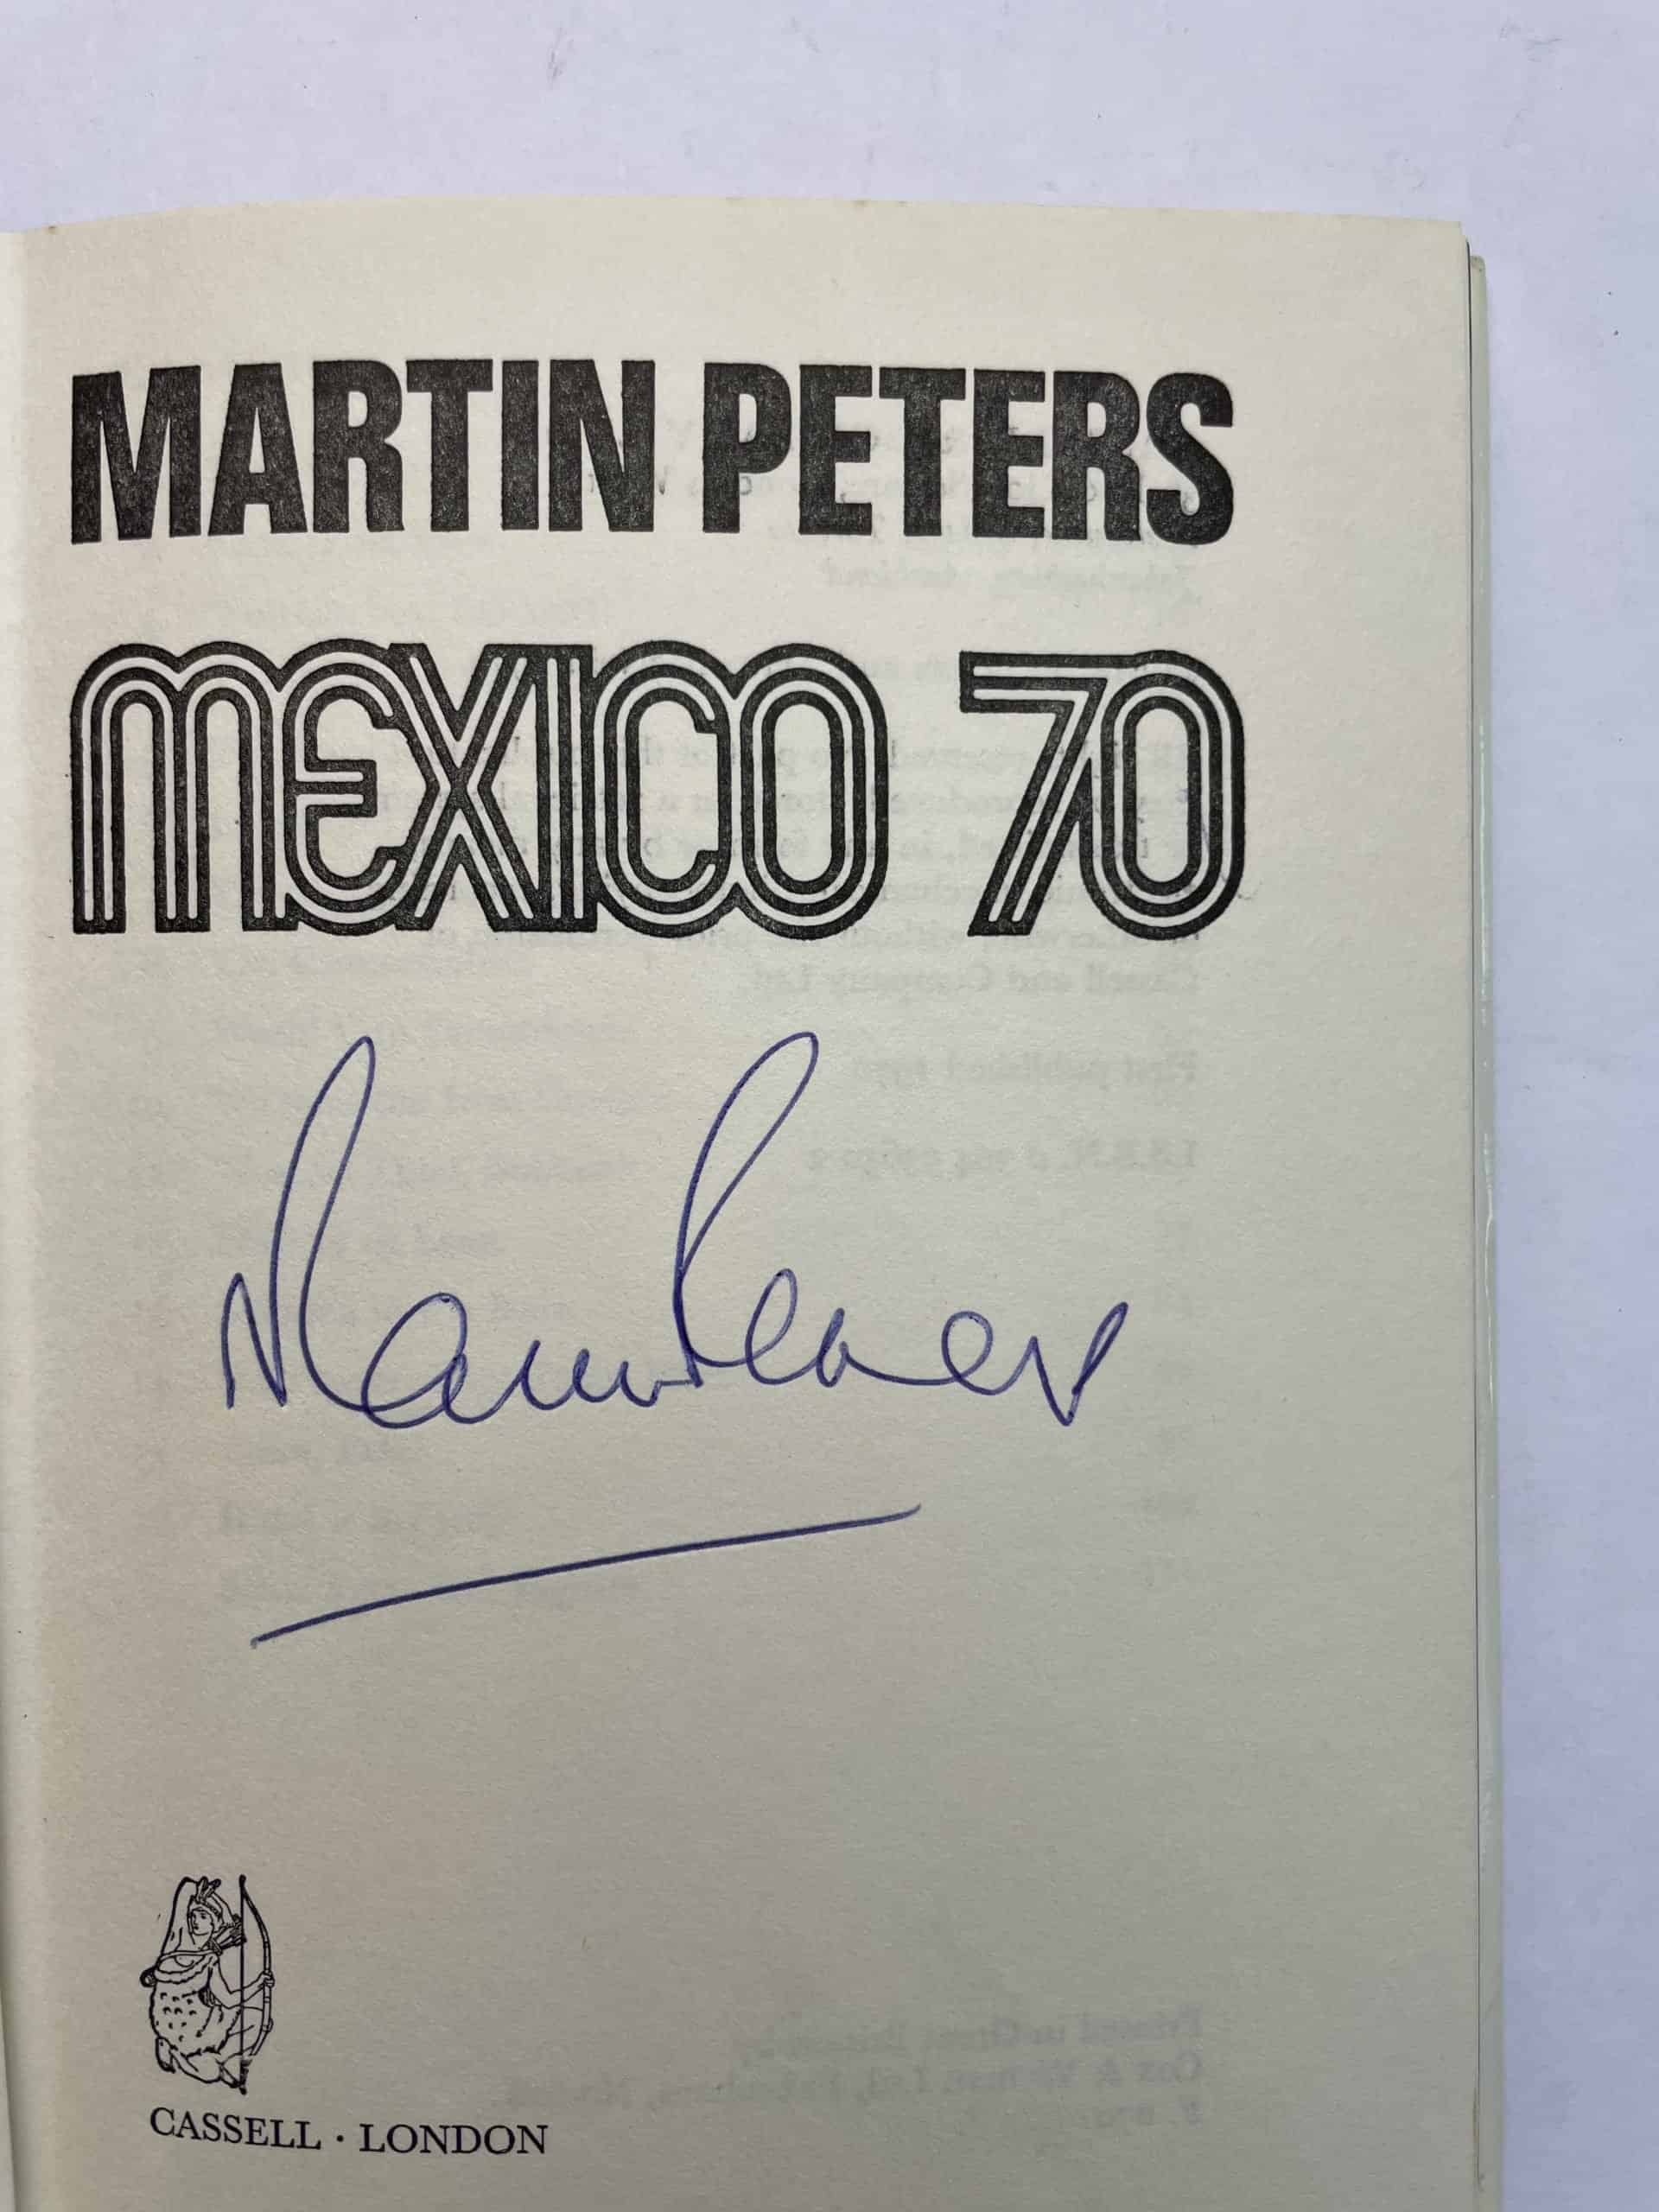 martin peters signed double set4